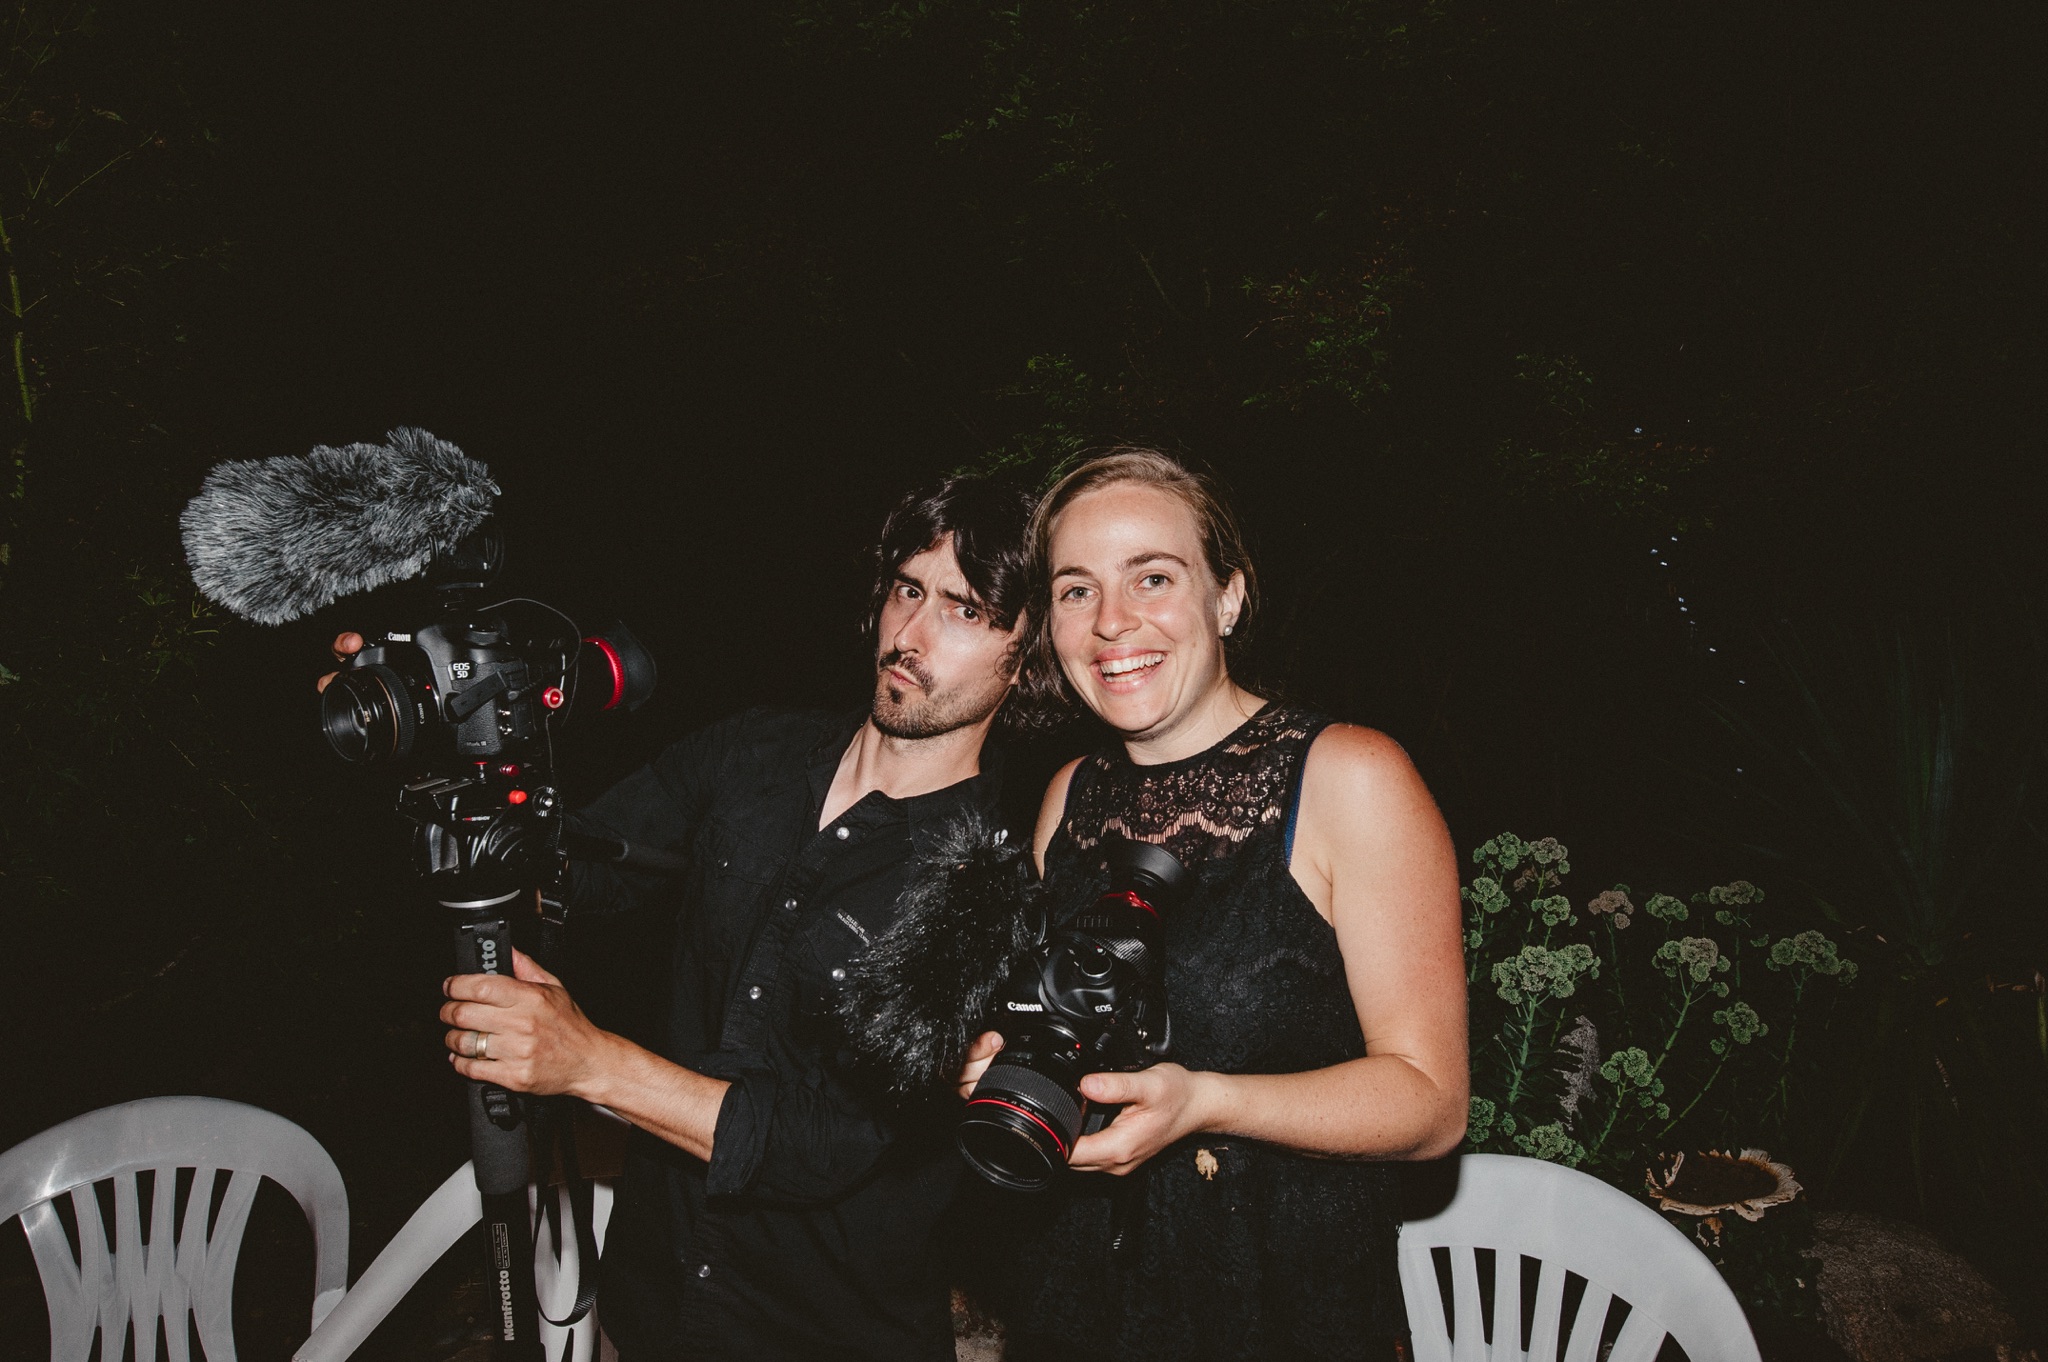 Melissa and Jim with their cameras filming a wedding video.